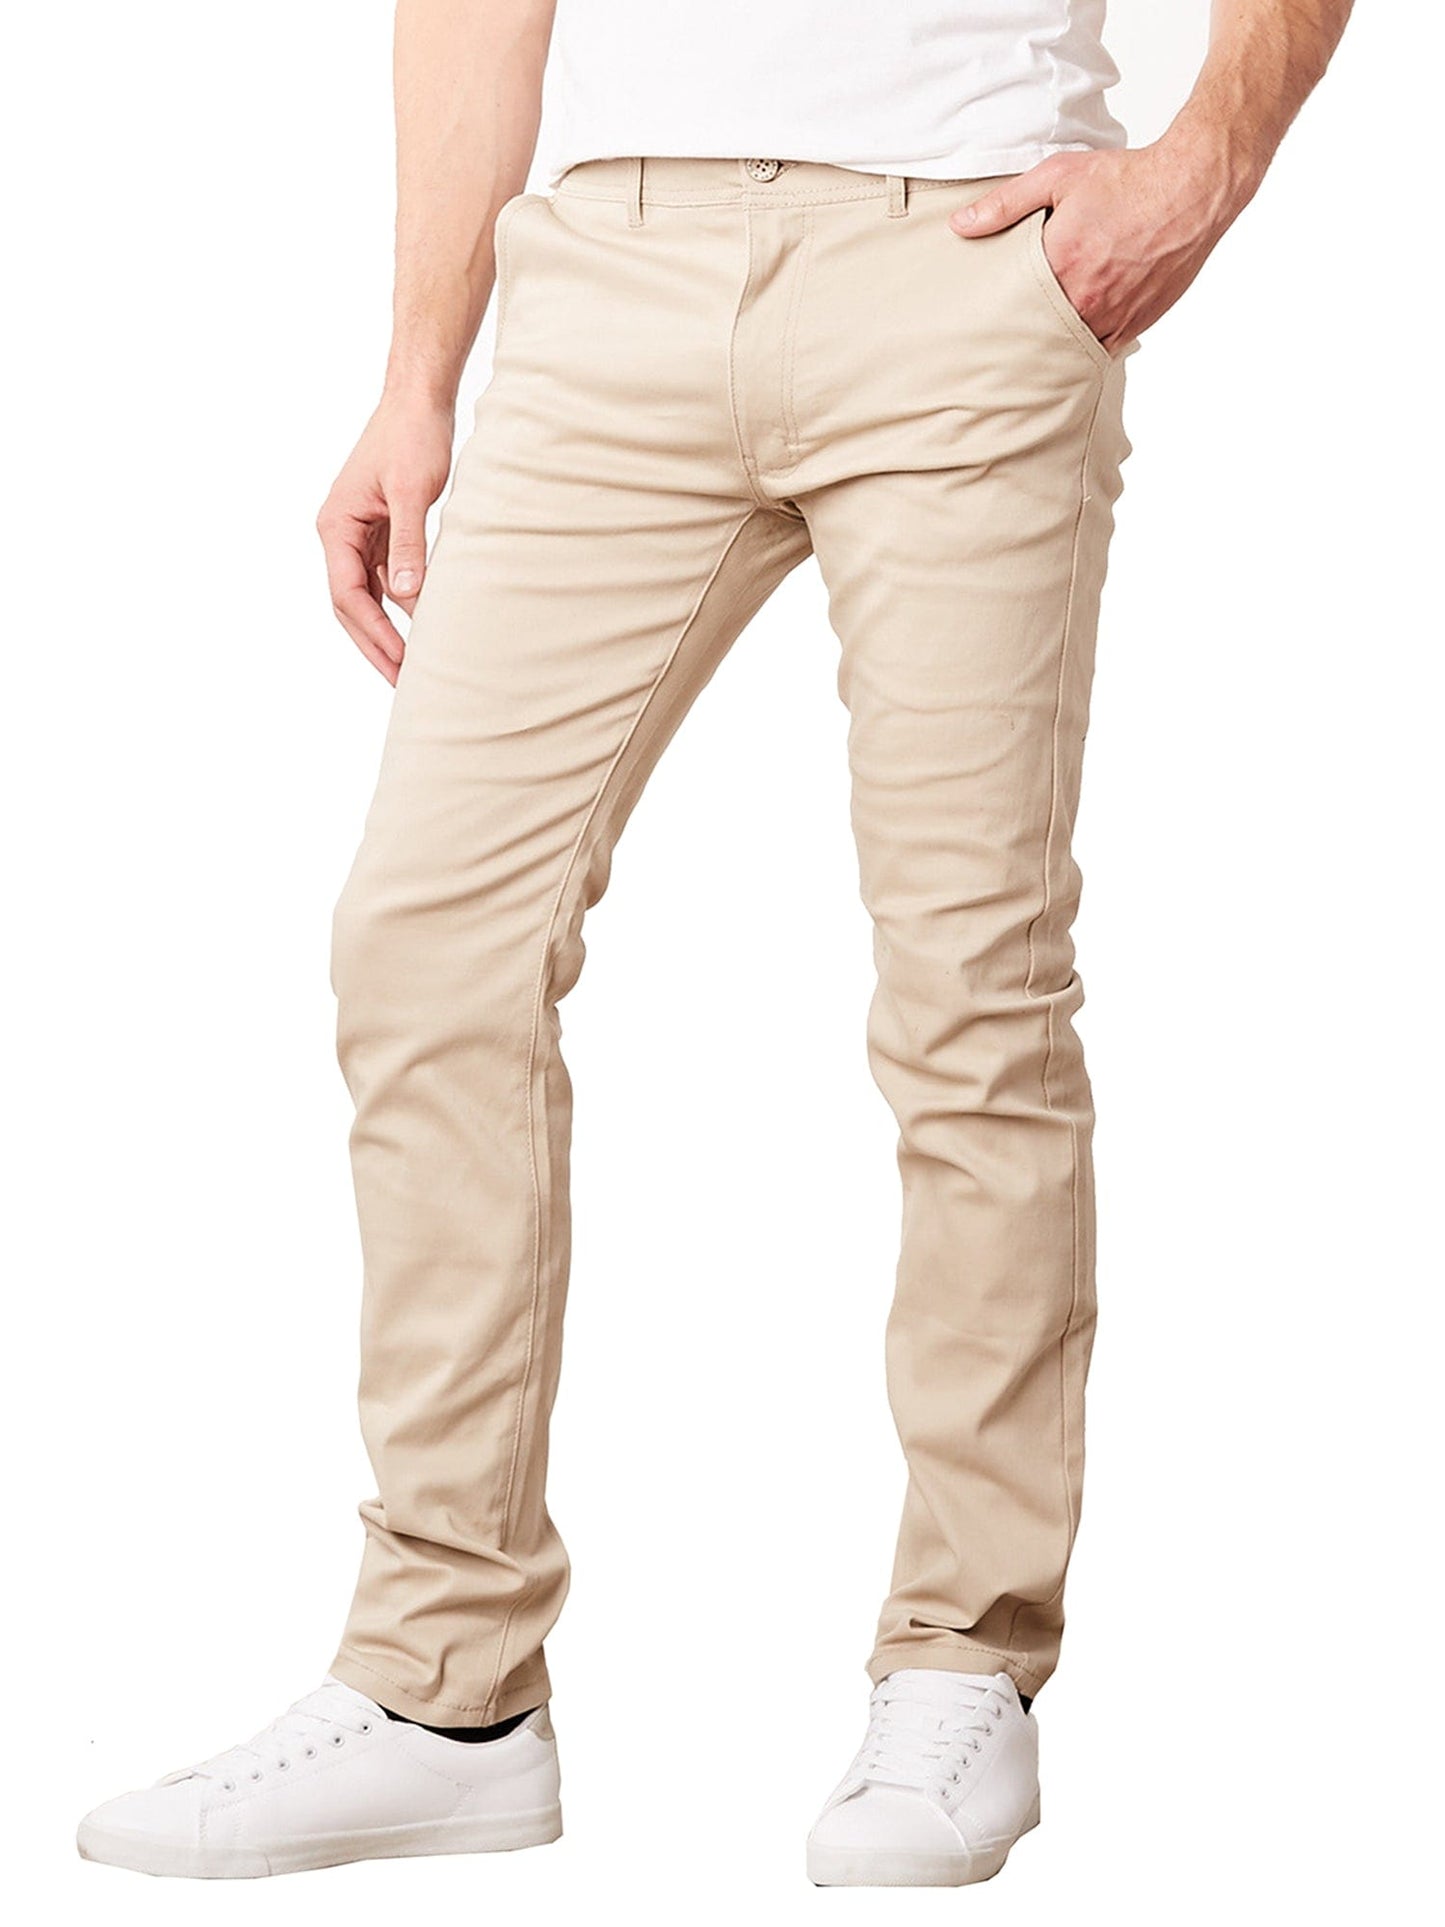 Men's Slim Fit Cotton Stretch Chino Pants - GalaxybyHarvic